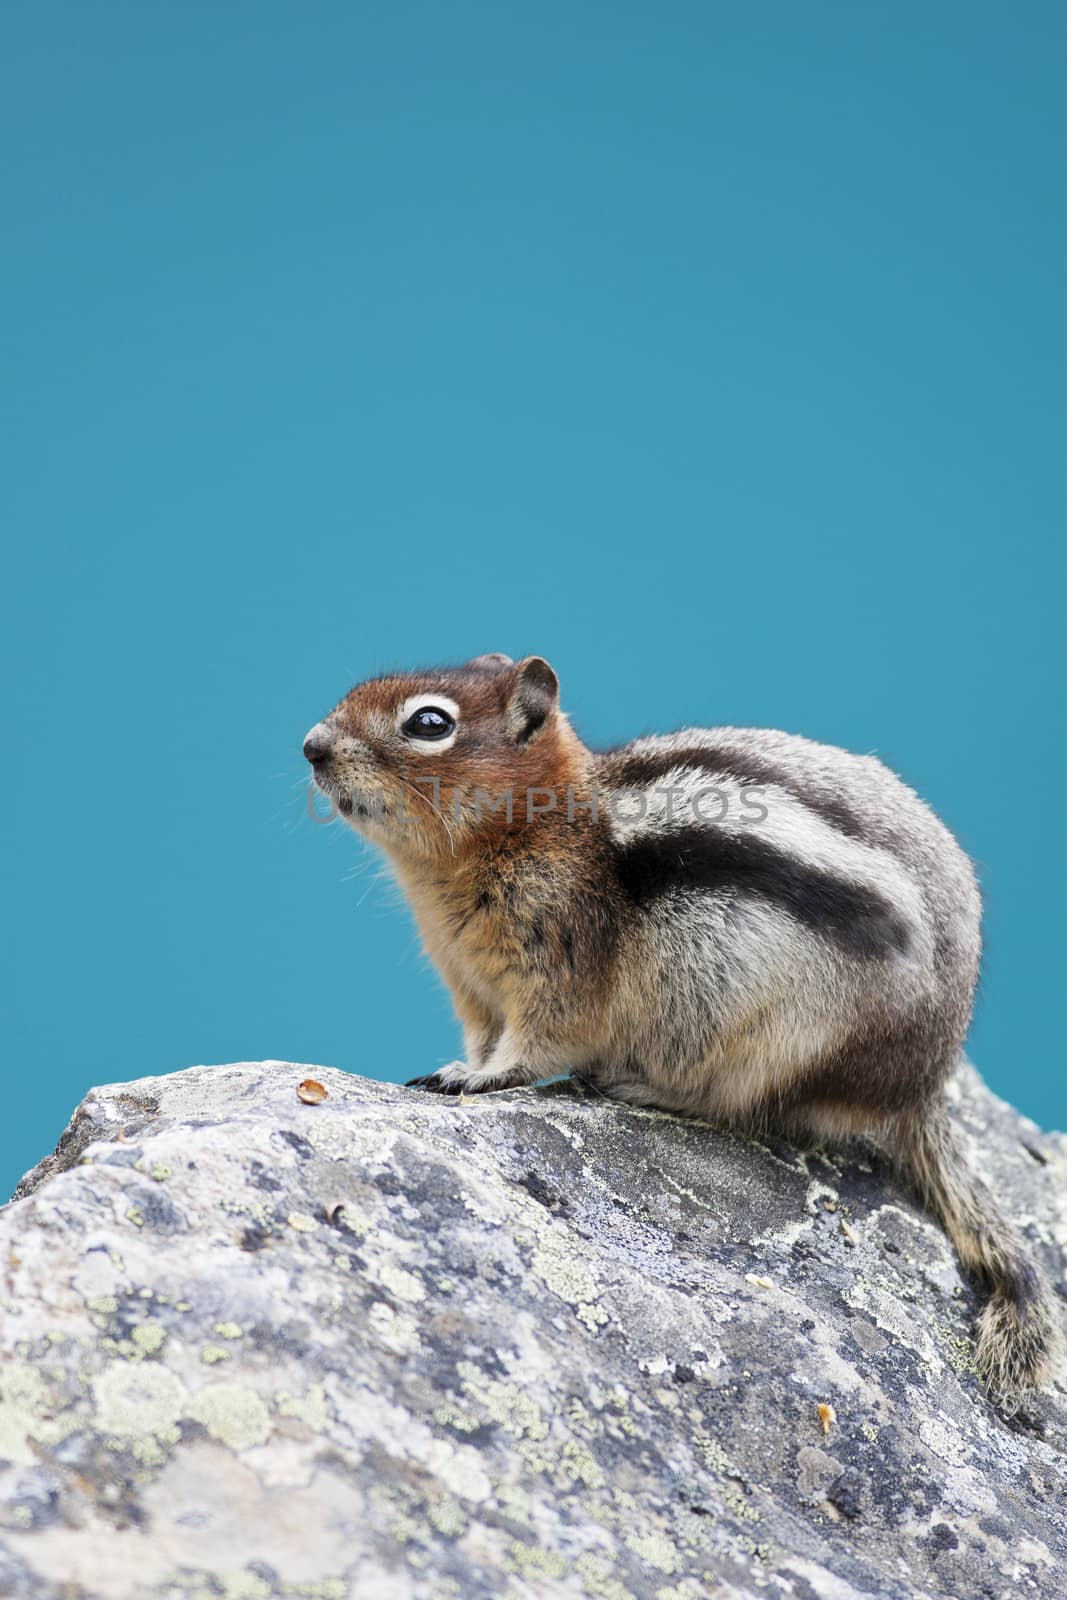 A chipmunk  sitting on a rock high above Moraine Lake in Banff National Park.  The background is lake water, not sky.  